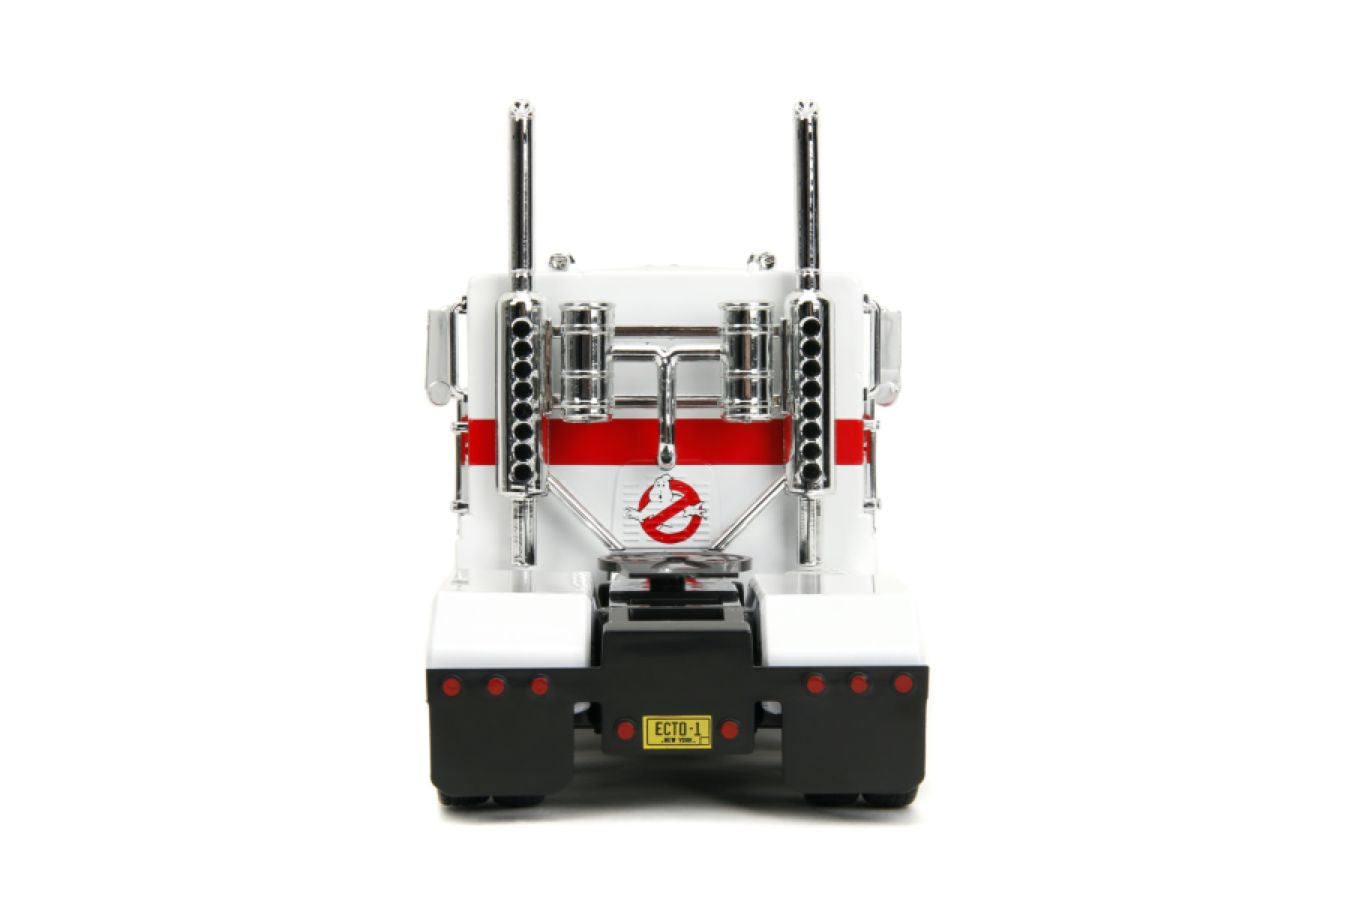 Hollywood Rides - Optimus Prime X Ghostbusters Ecto-1 Mash-up 1:24 Scale Diecast Vehicle